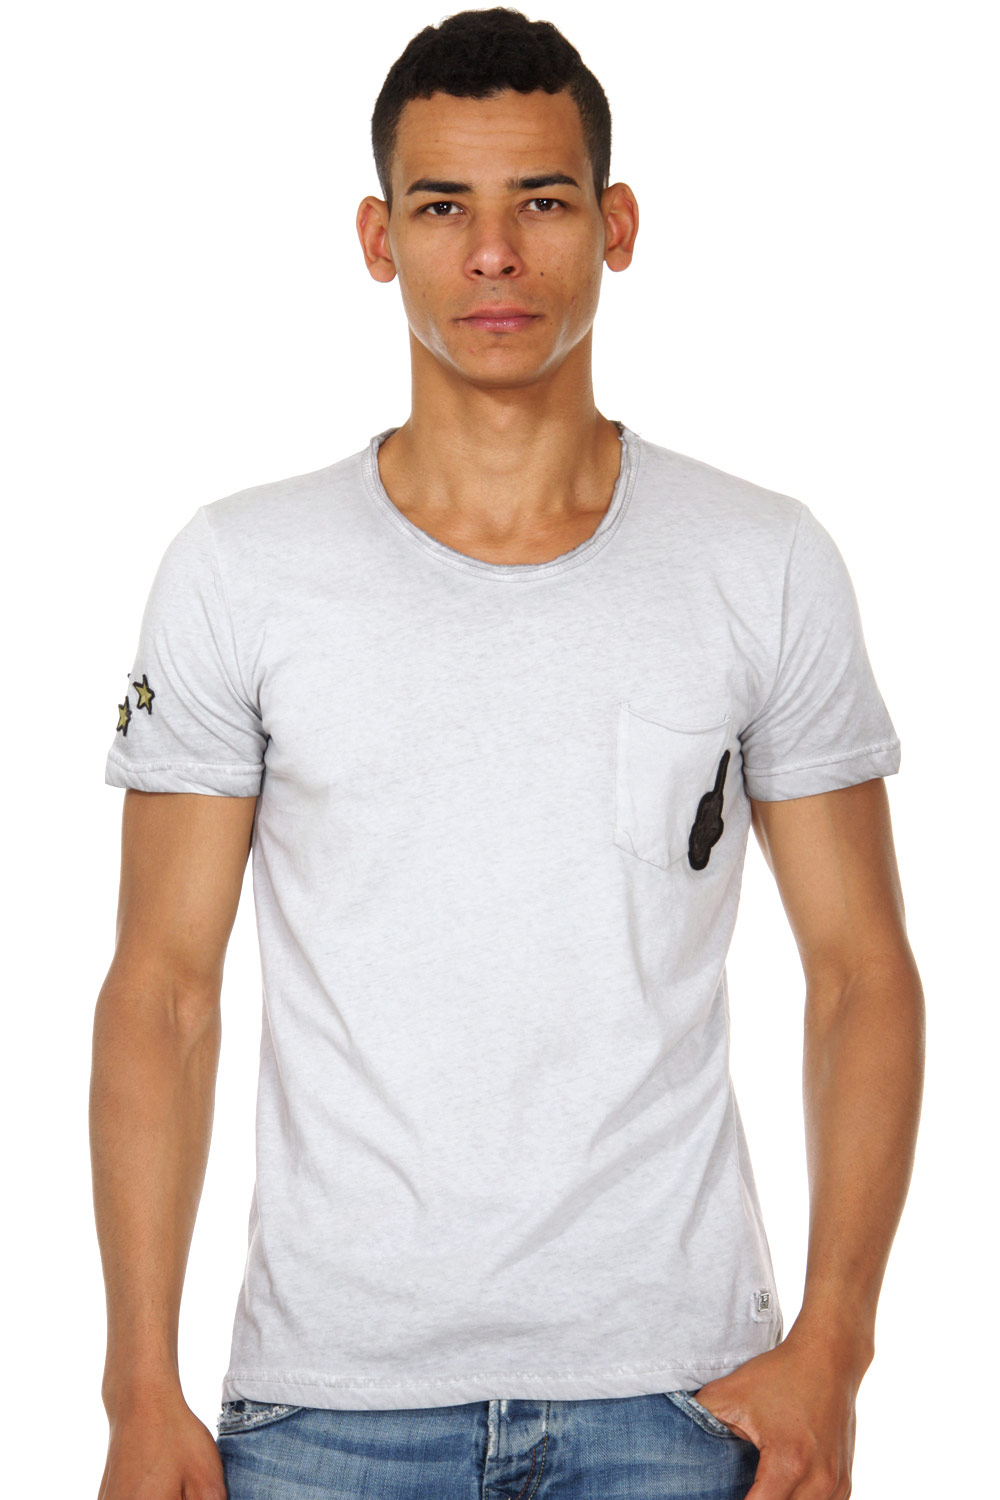 R-NEAL t-shirt r-neck slim fit at oboy.com